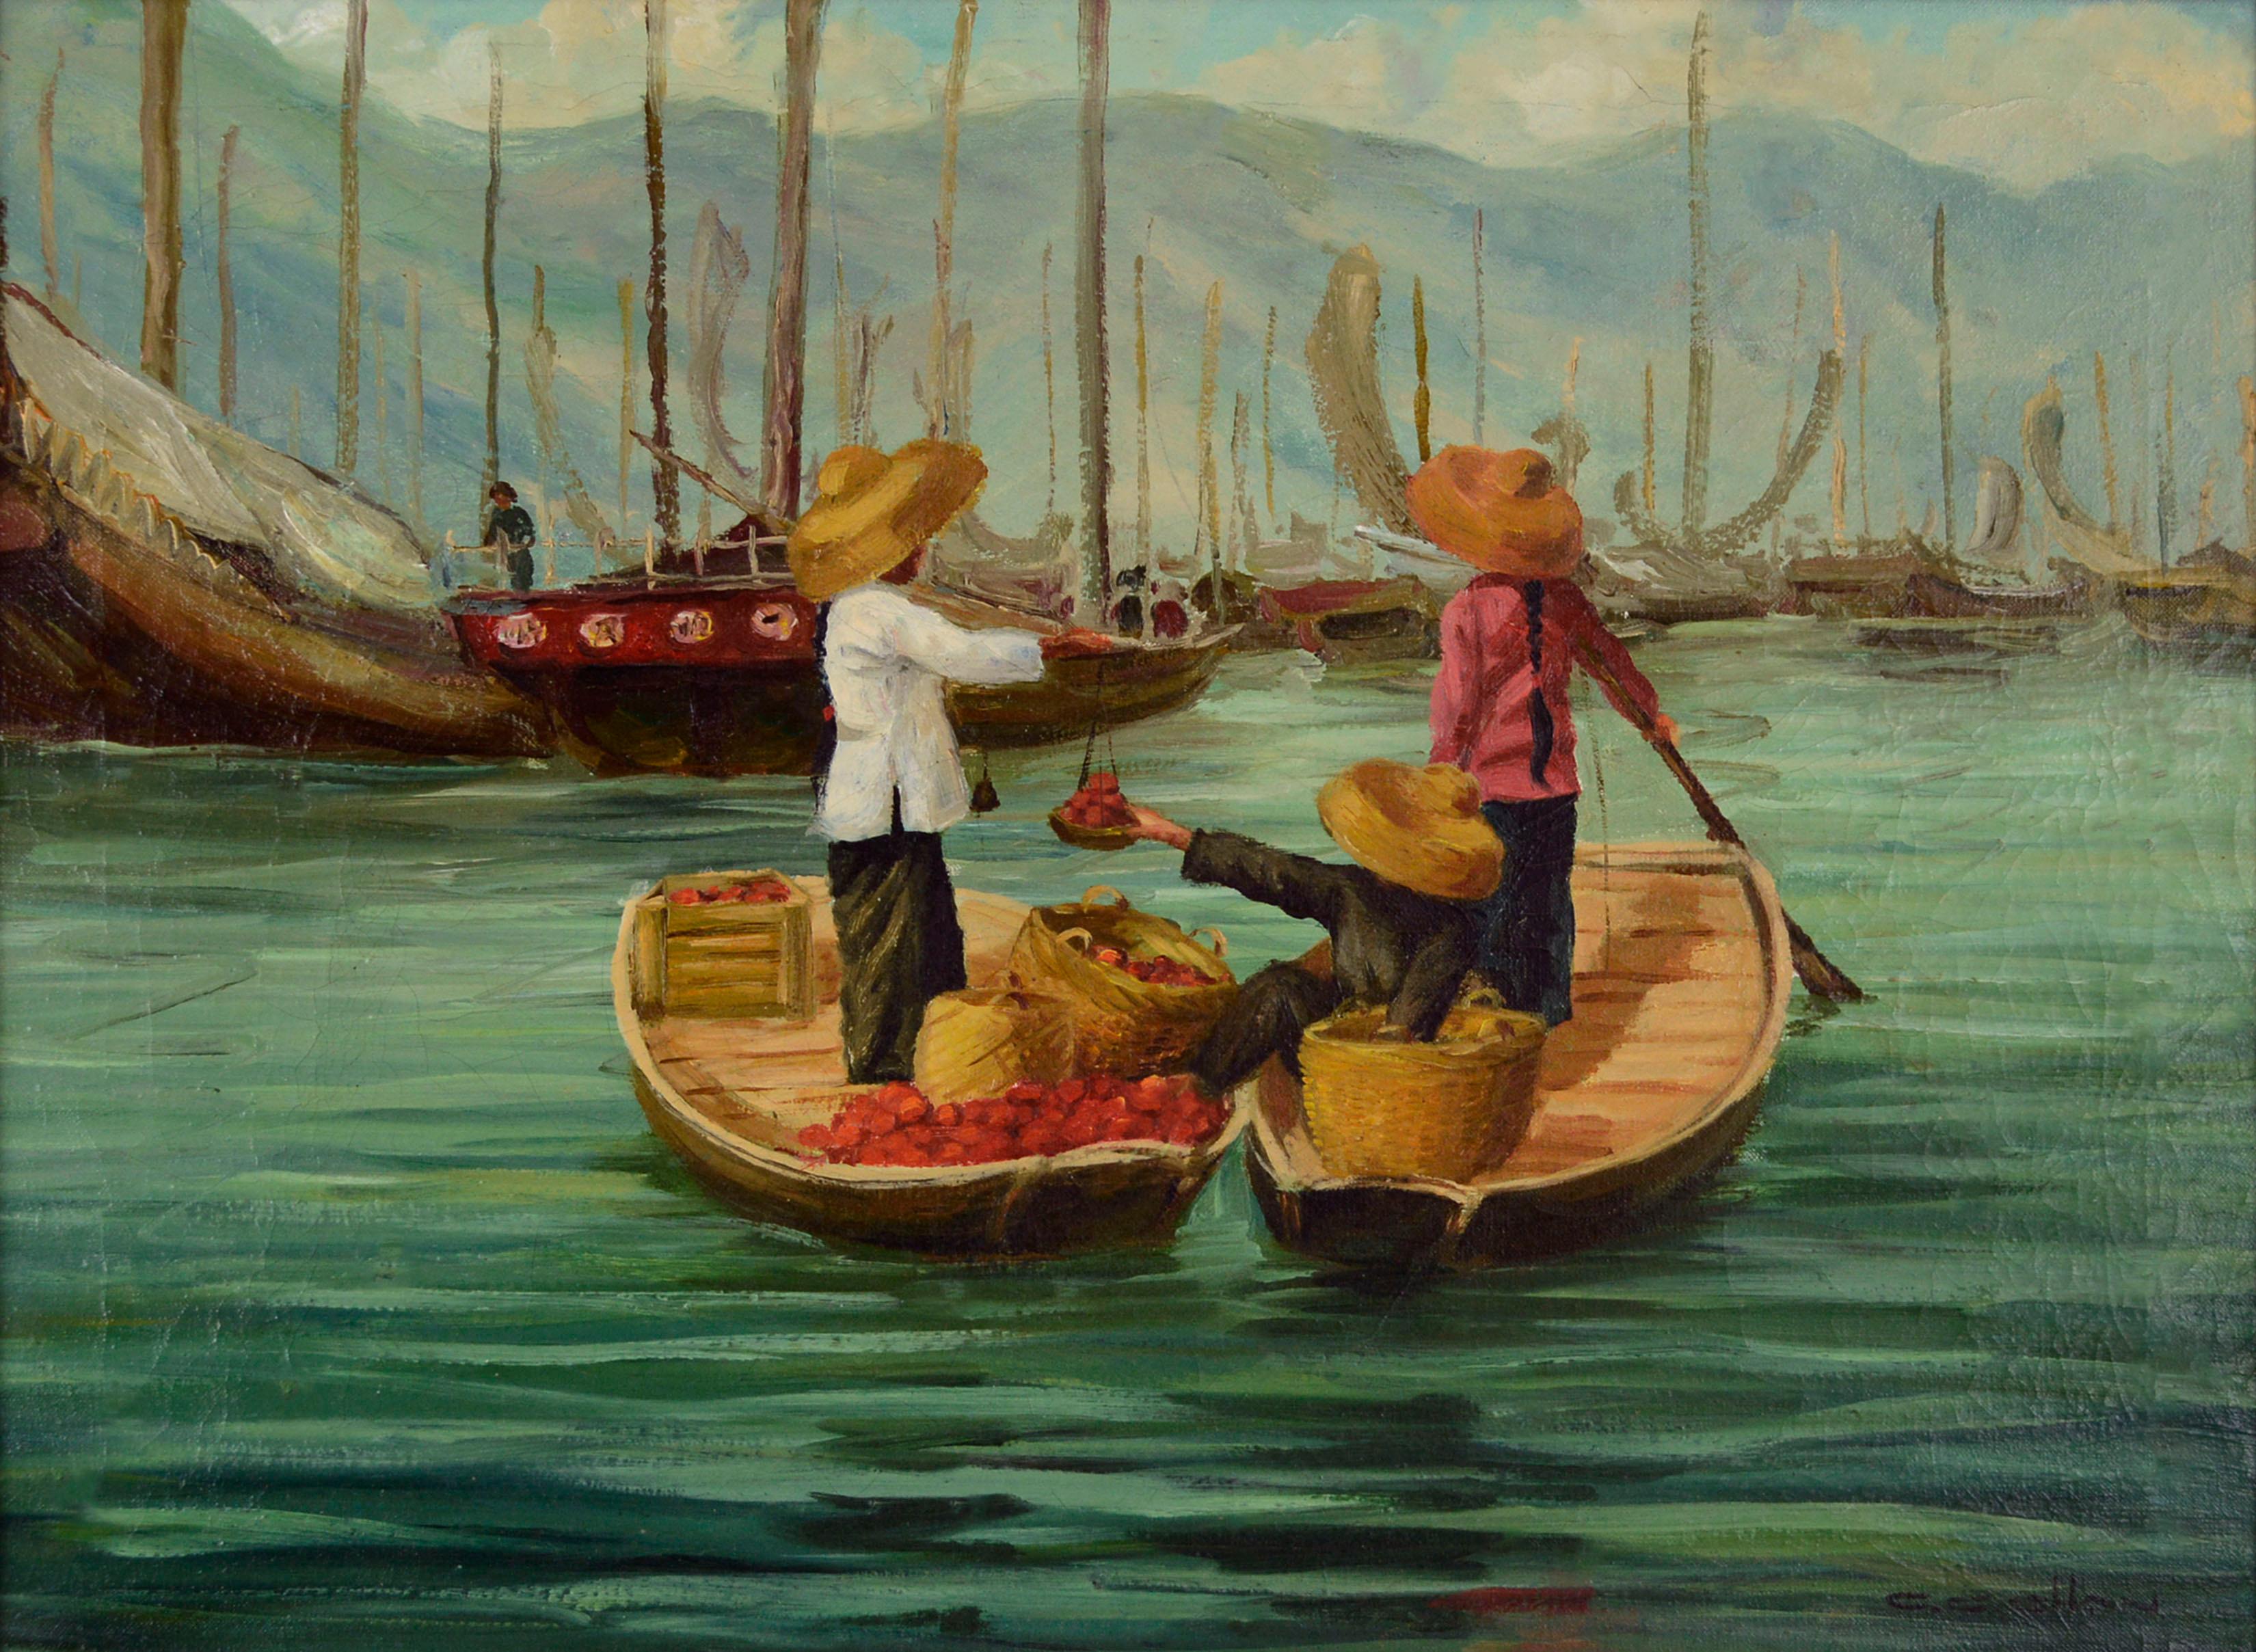 Mid Century Figurative Seascape, Shanghai Floating Market - Painting by C.C. Chan